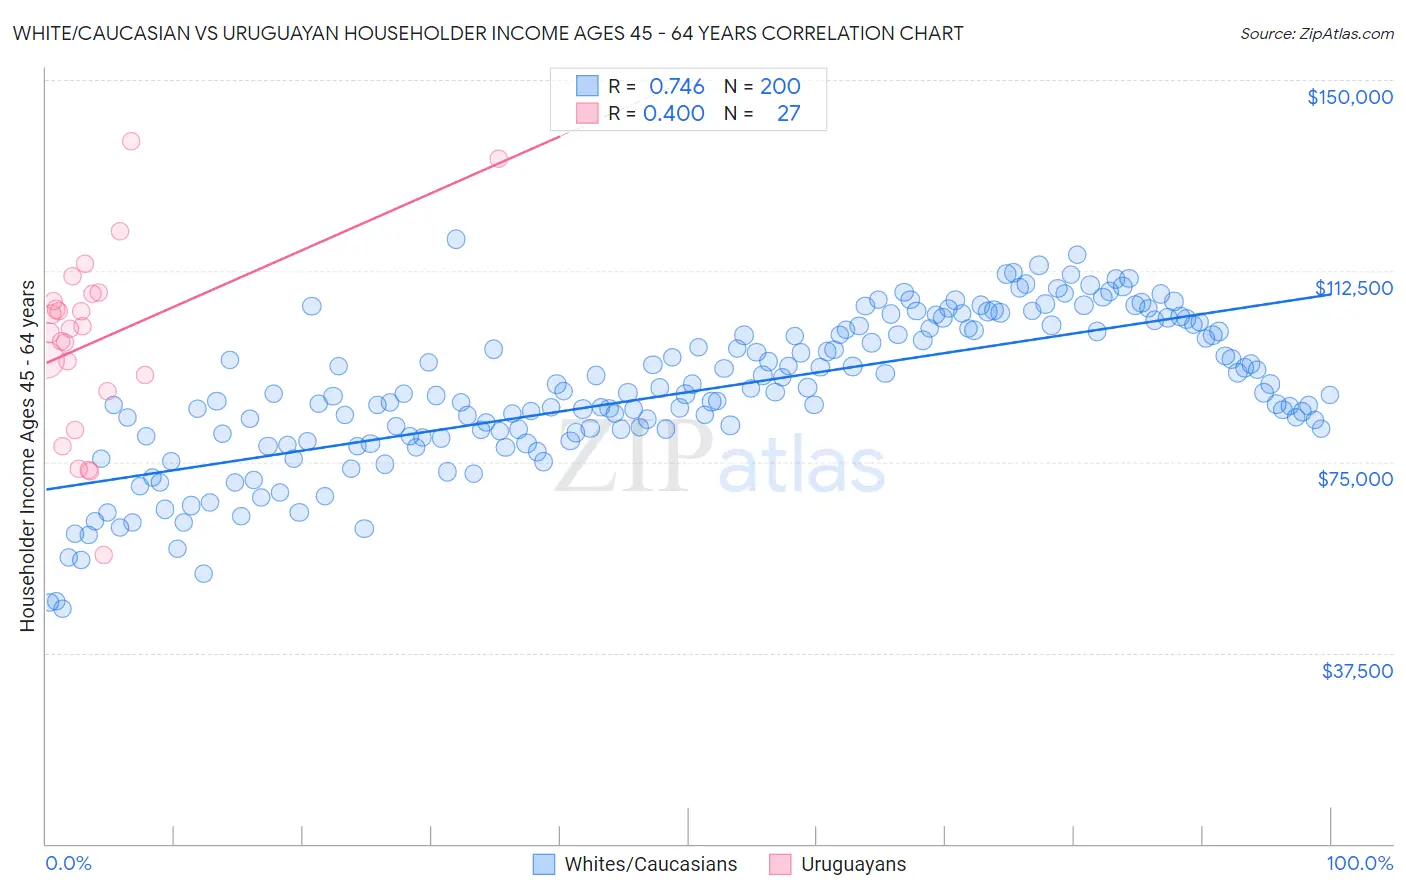 White/Caucasian vs Uruguayan Householder Income Ages 45 - 64 years